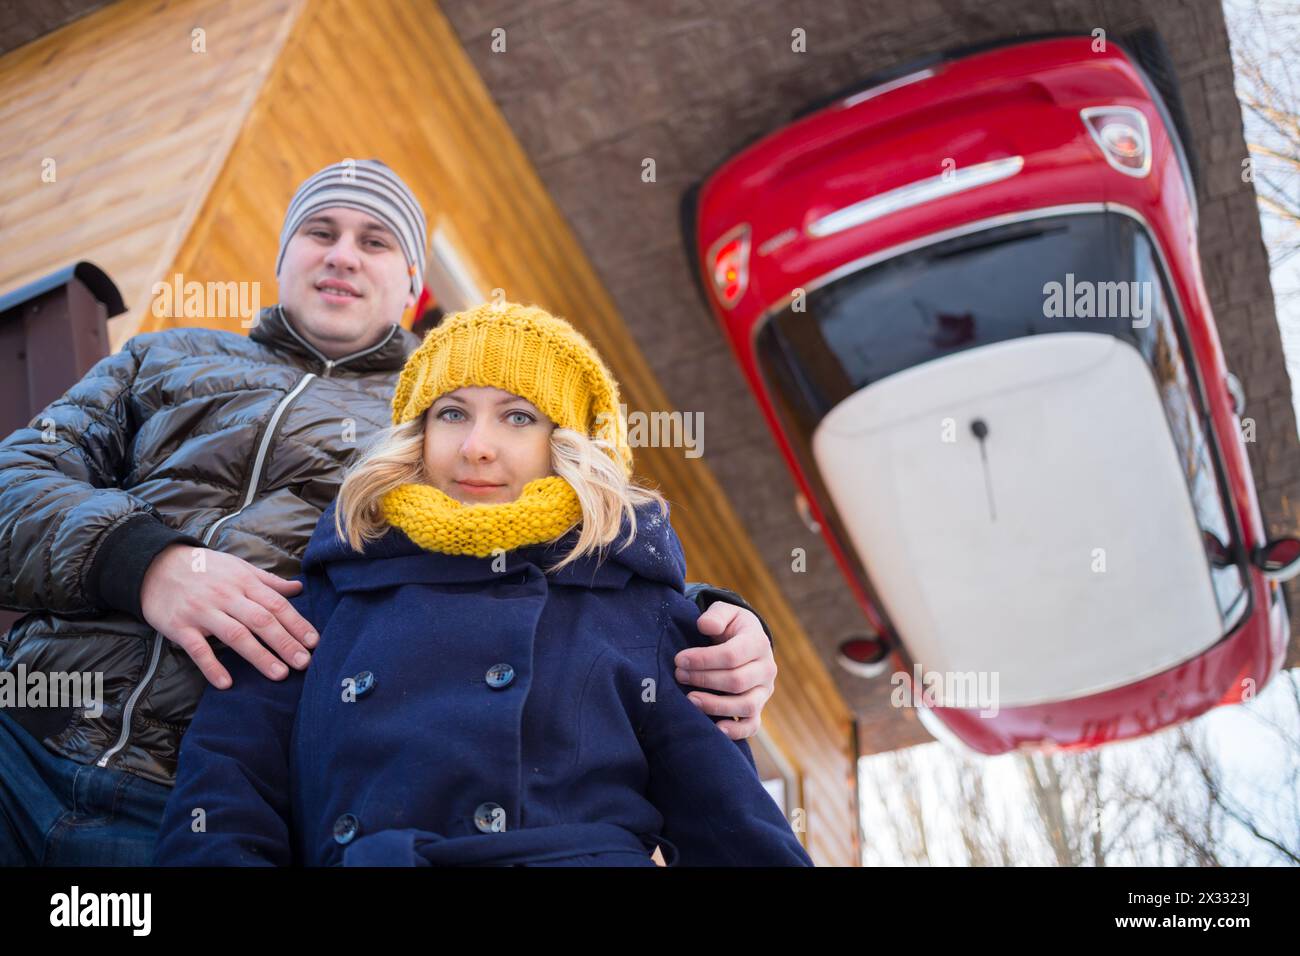 Couple against the inverted house with red car Stock Photo